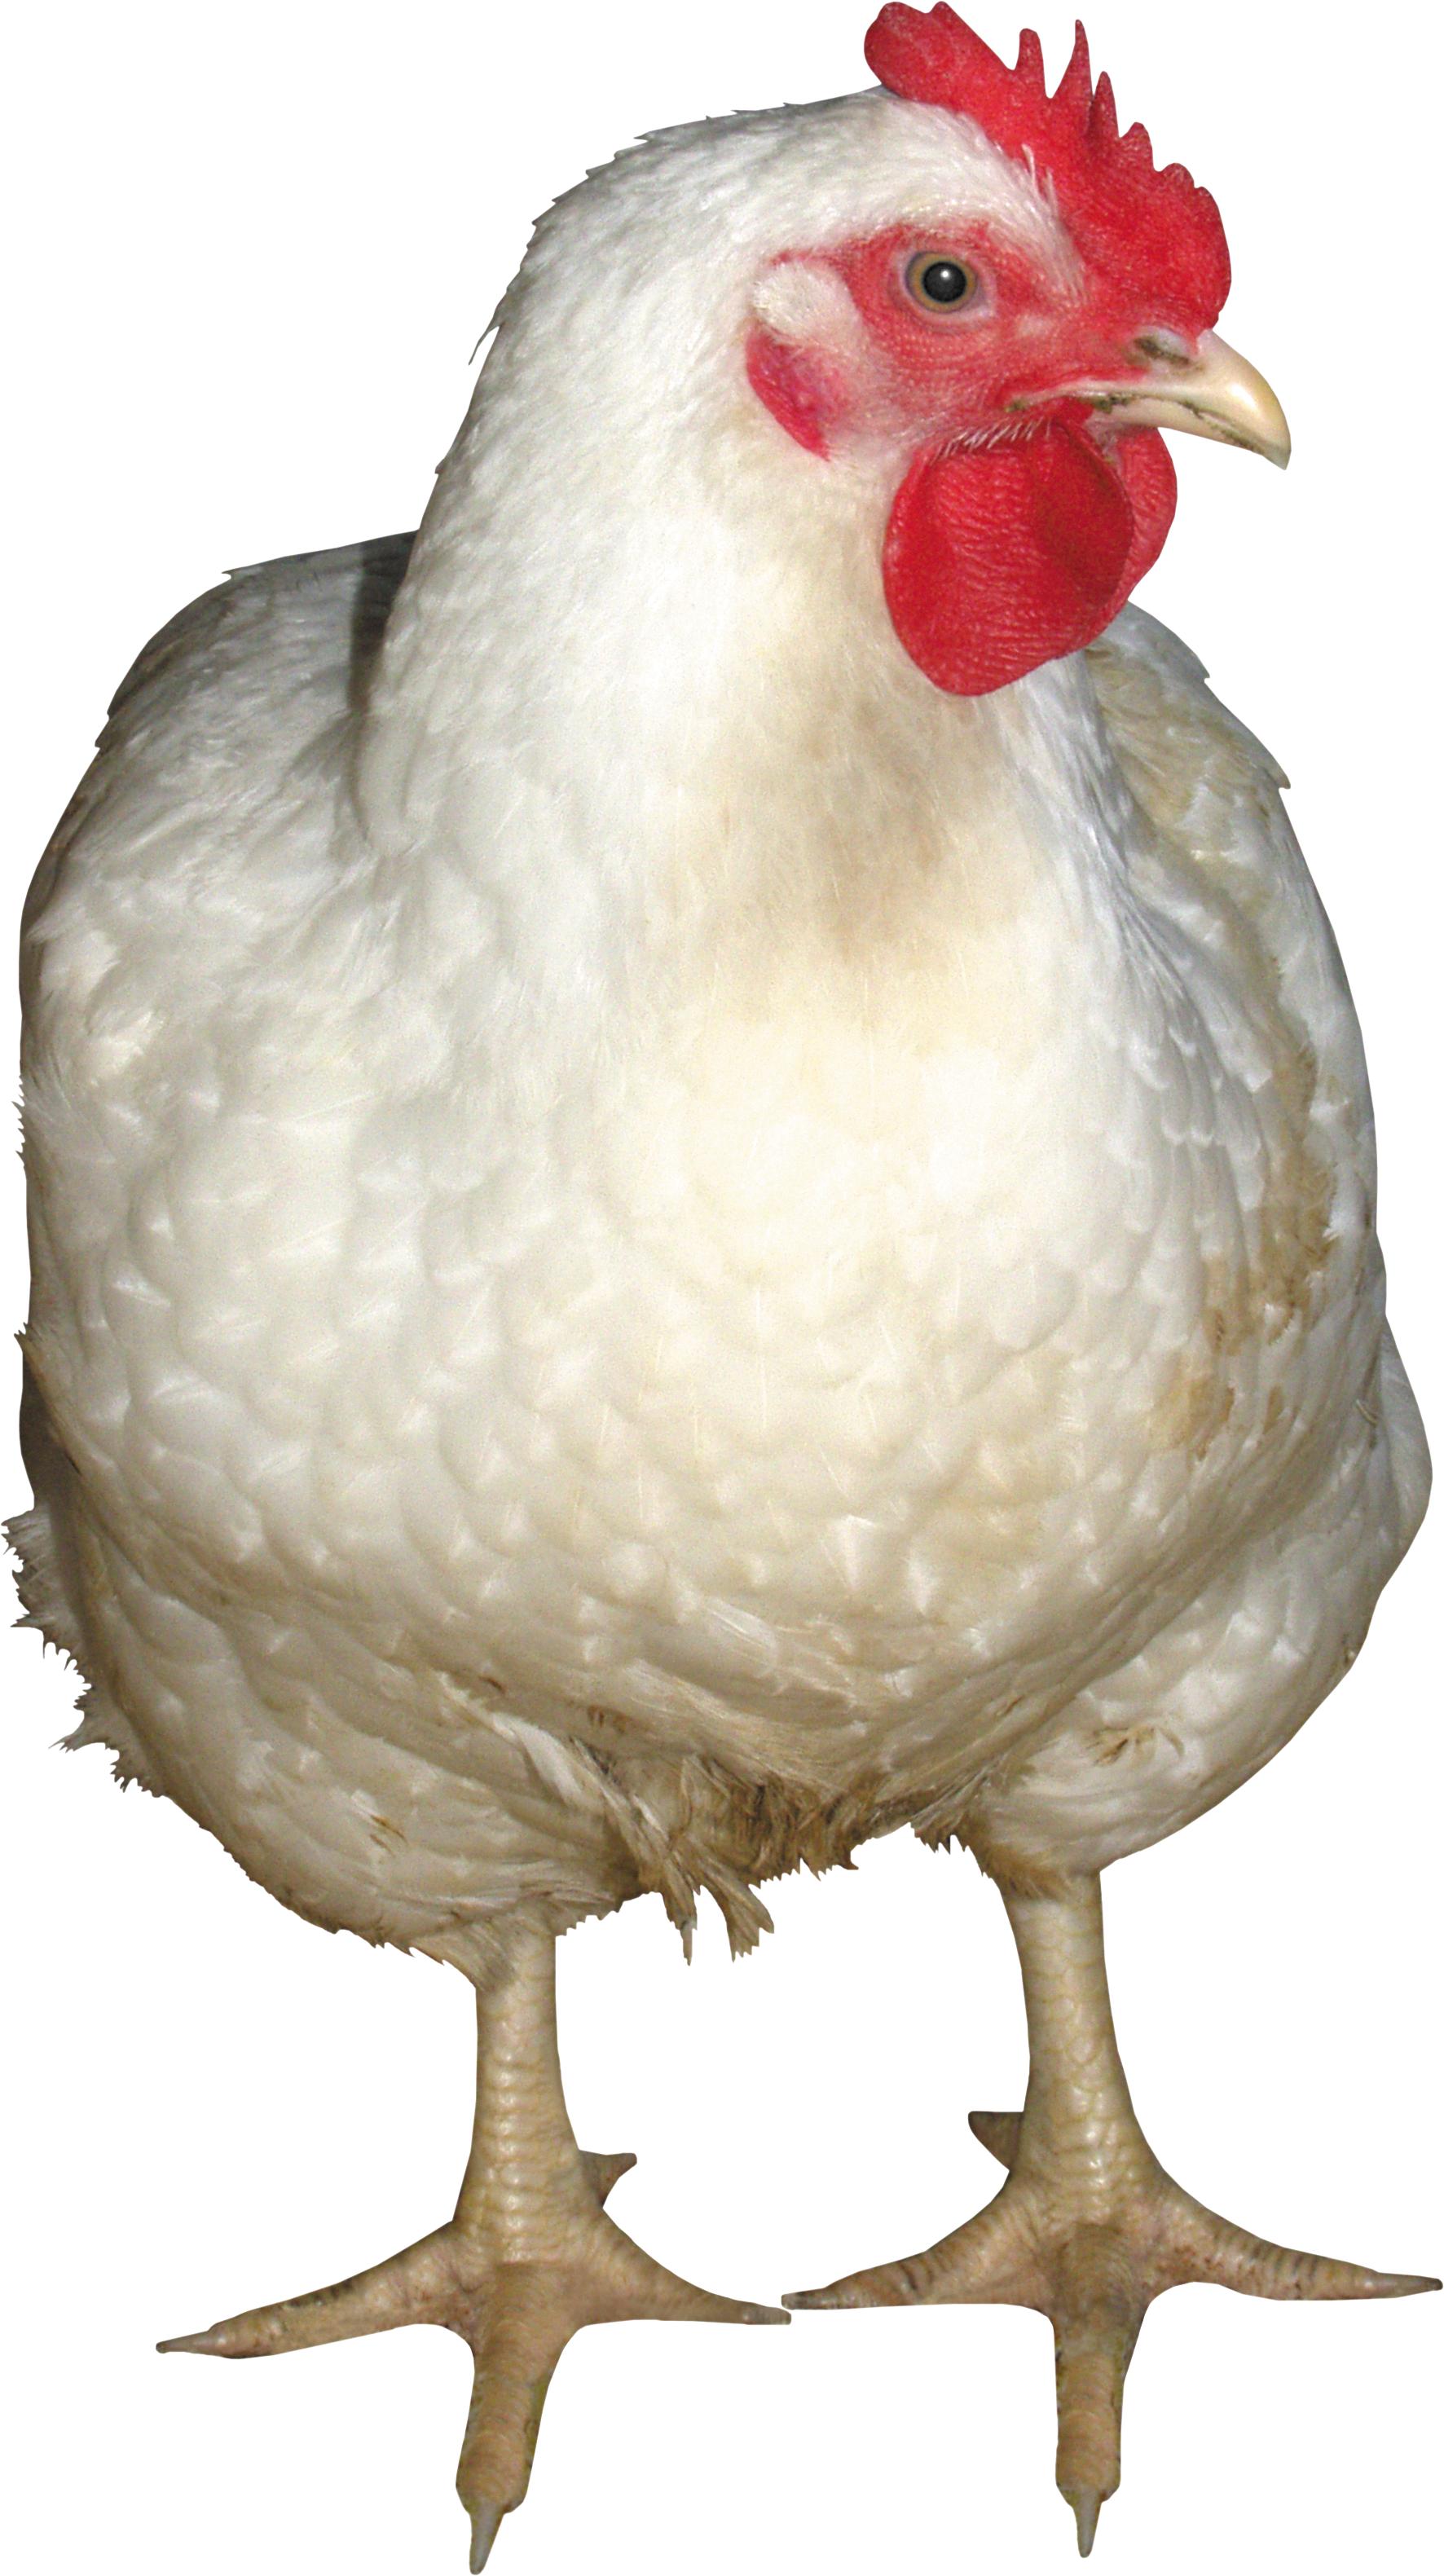 PNG HD Of Chickens - 148738